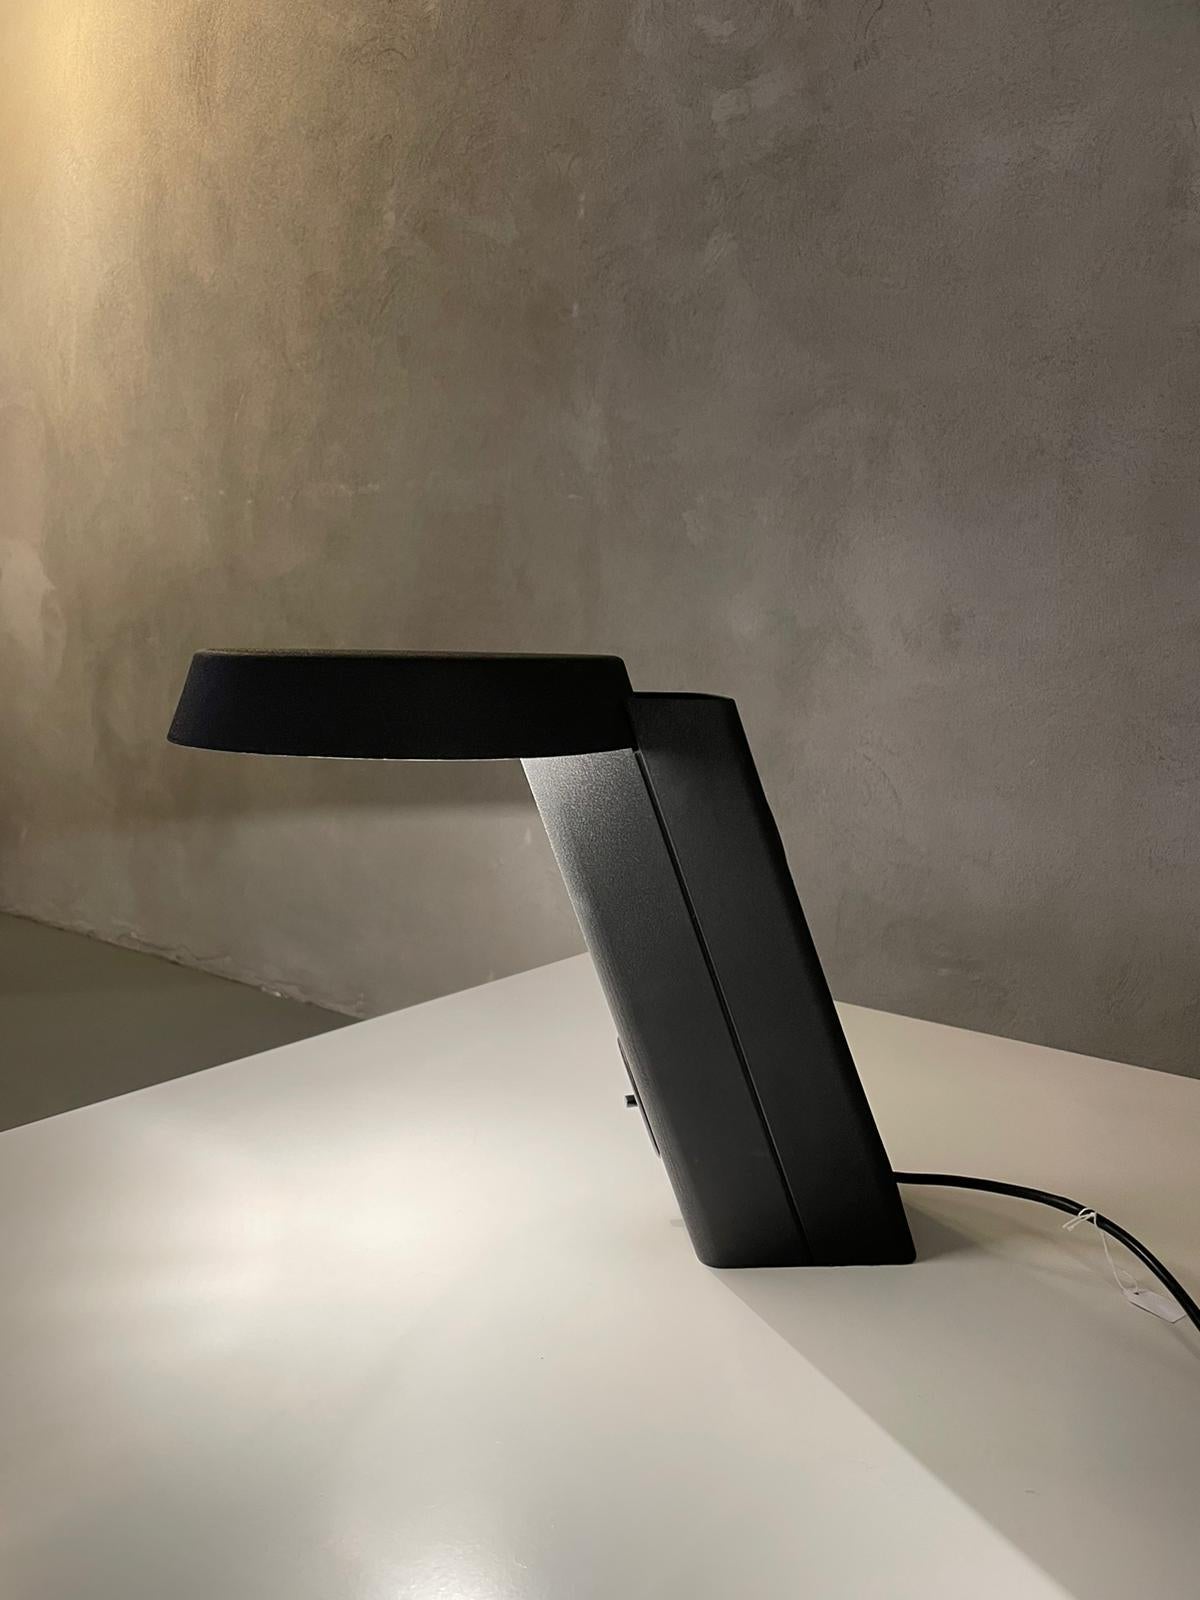 Table Lamp mod. 607 designed by Gino Sarfatti for Arteluce in Italy, 1971.
Lamp is in black painted aluminium and it's in original conditions.
Beautiful lamp with an inclined parallelepiped-shaped base that supports the round diffuser that fits